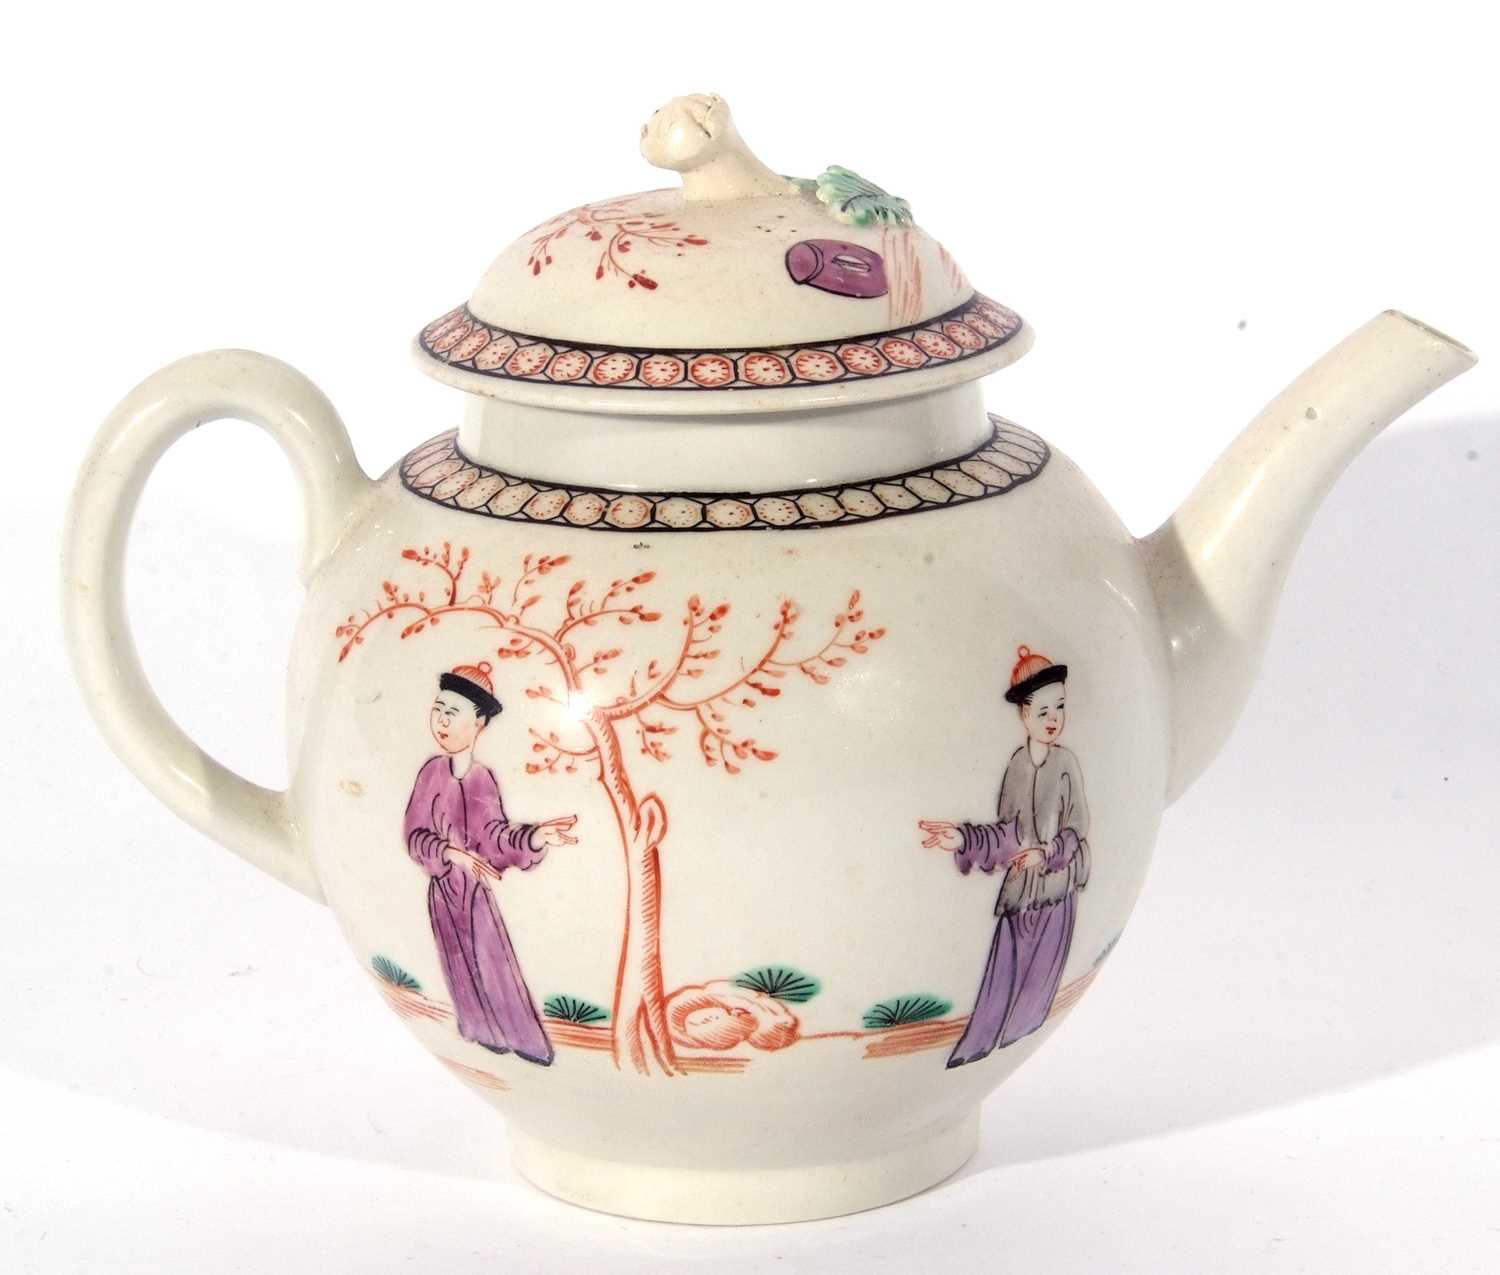 Lowestoft porcelain tea pot, circa 1780, with a polychrome design of Chinese figures by a tree, - Image 2 of 8